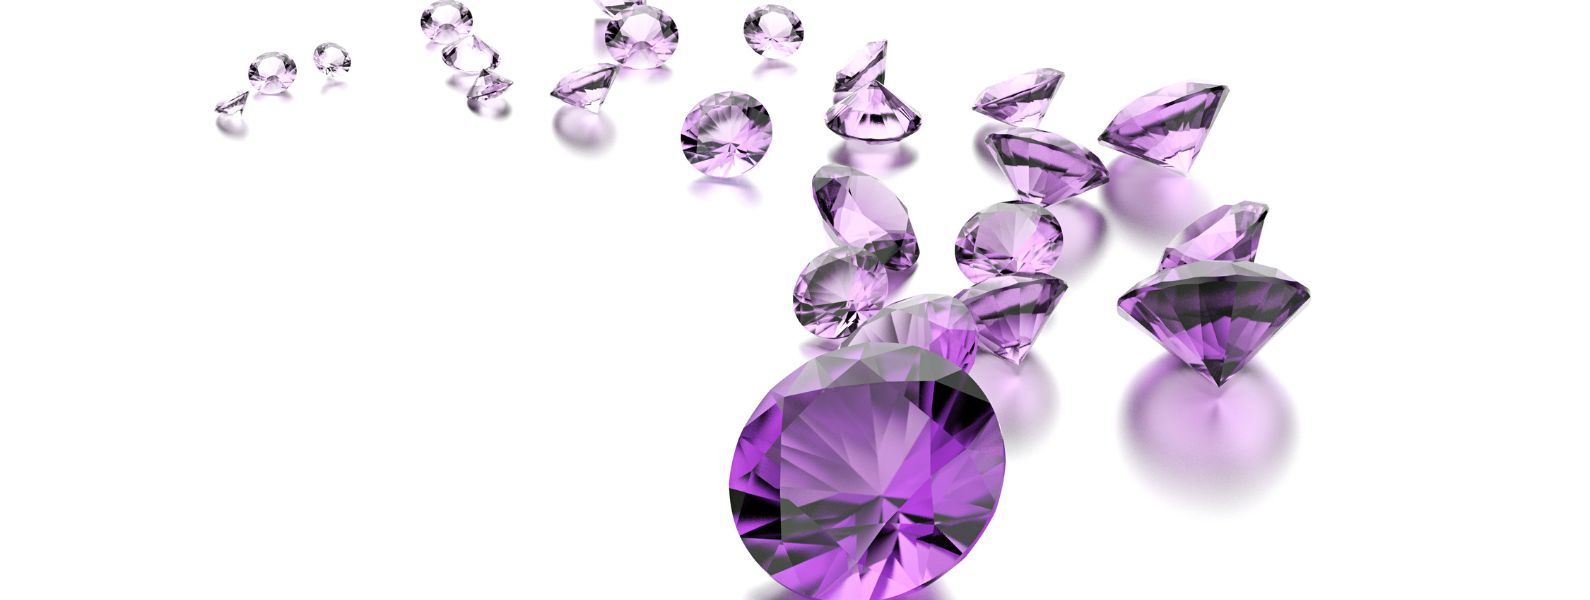 Amethyst Gemstones spread out. Amethyst - A Folklore Tale - from Jewels of St Leon